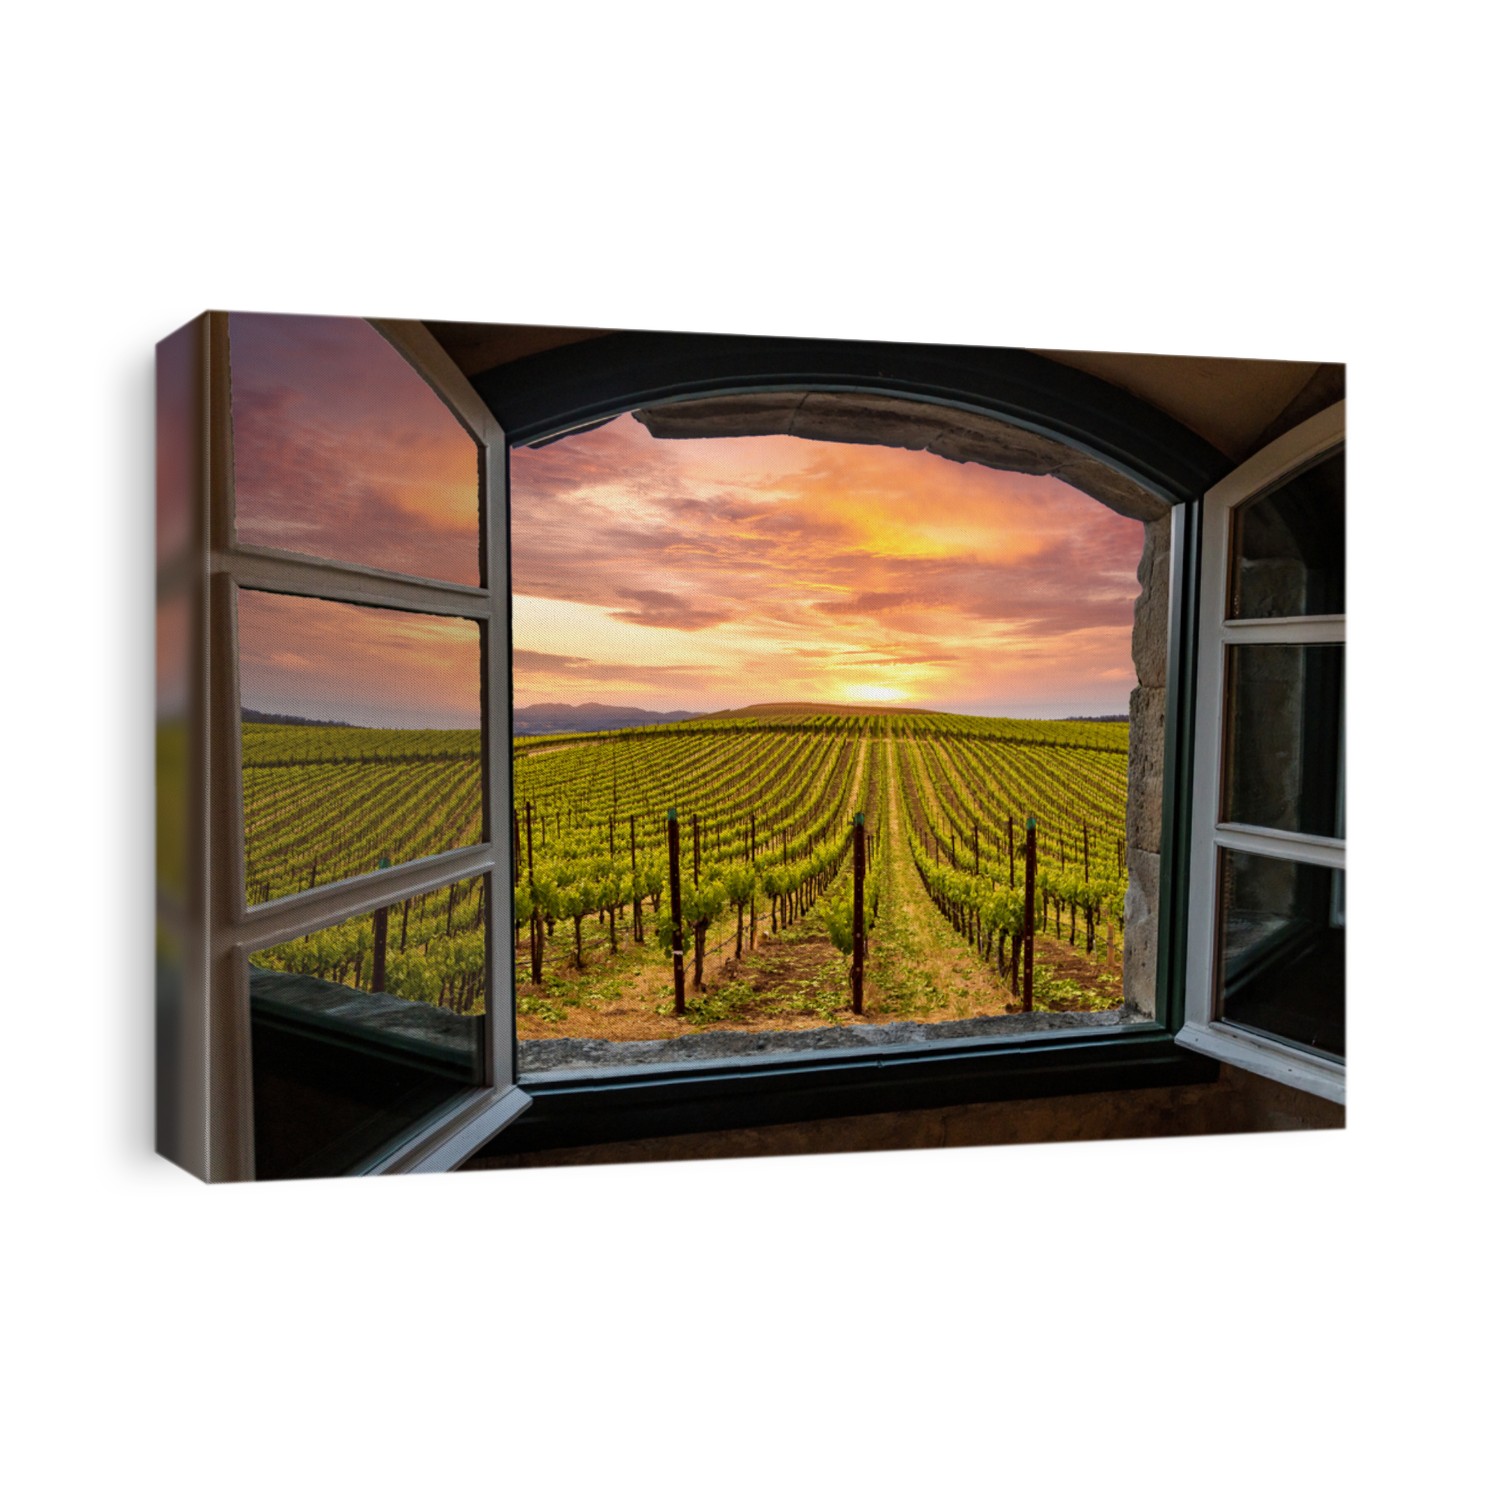 View of Napa Valley Vineyards Spring Sunrise Through a Window 